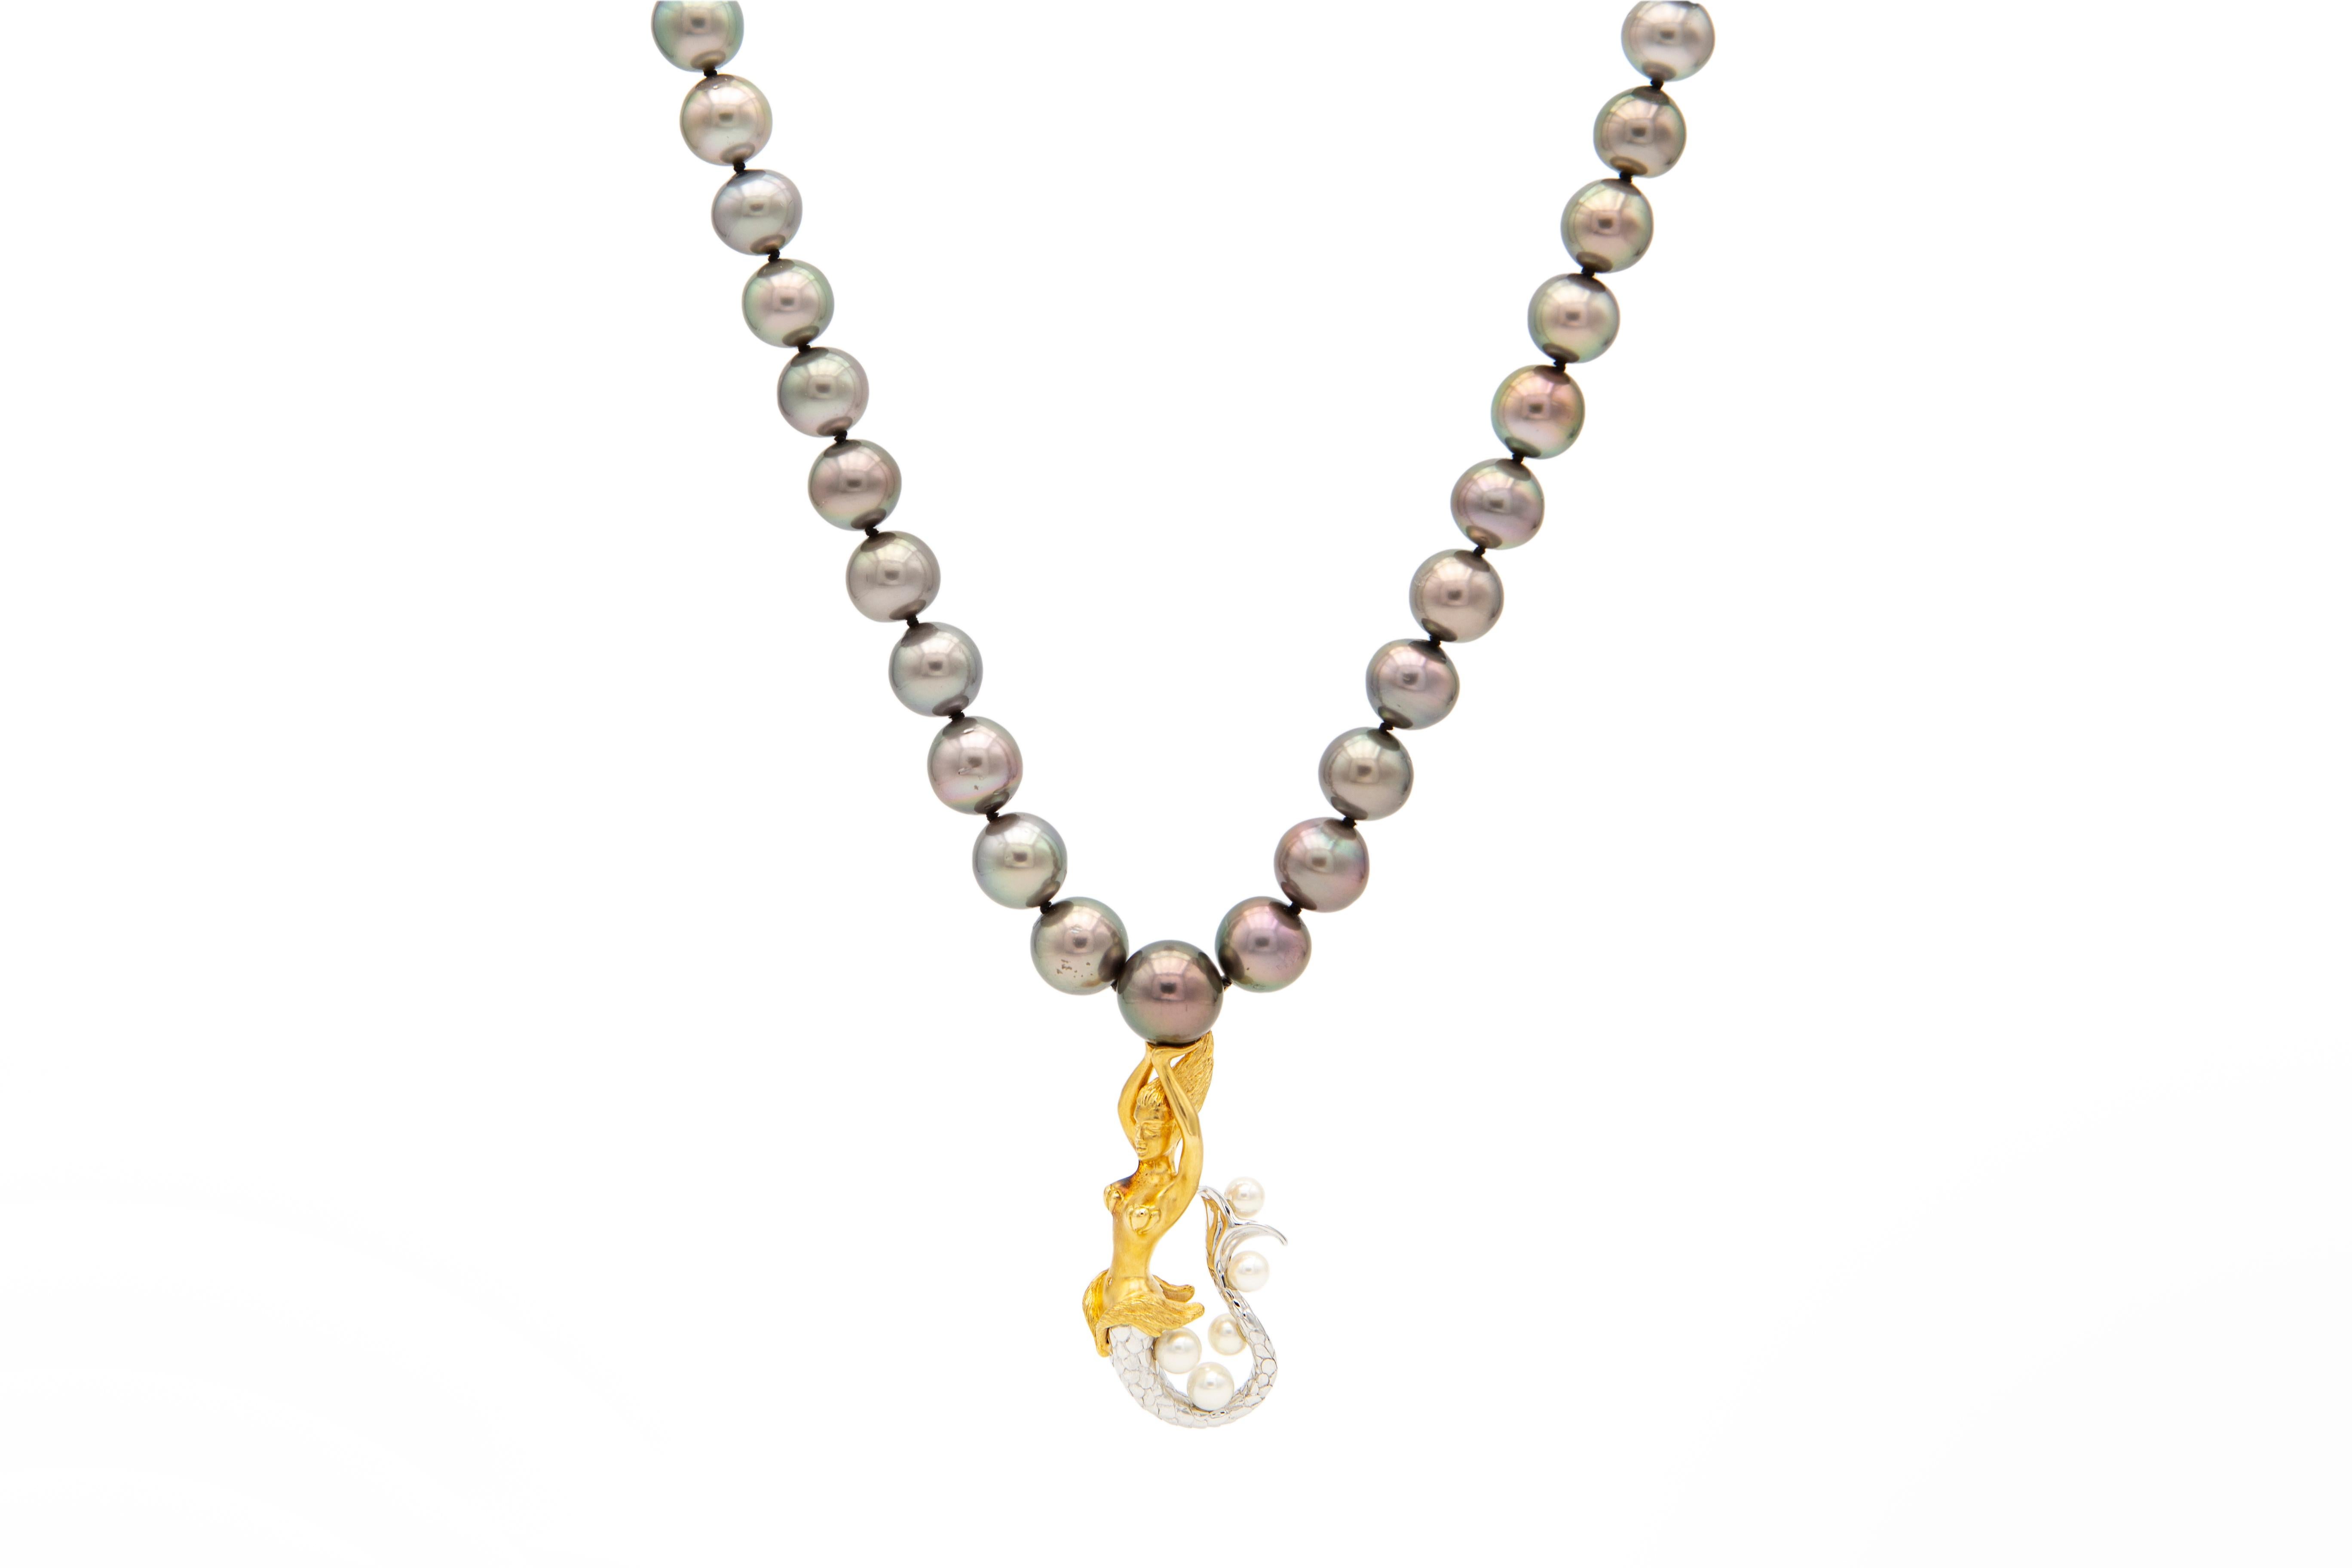 Brilliant Cut 18kt White and Rose Gold Mermaid Pendant Necklace with Tahiti and Akoya Pearls For Sale